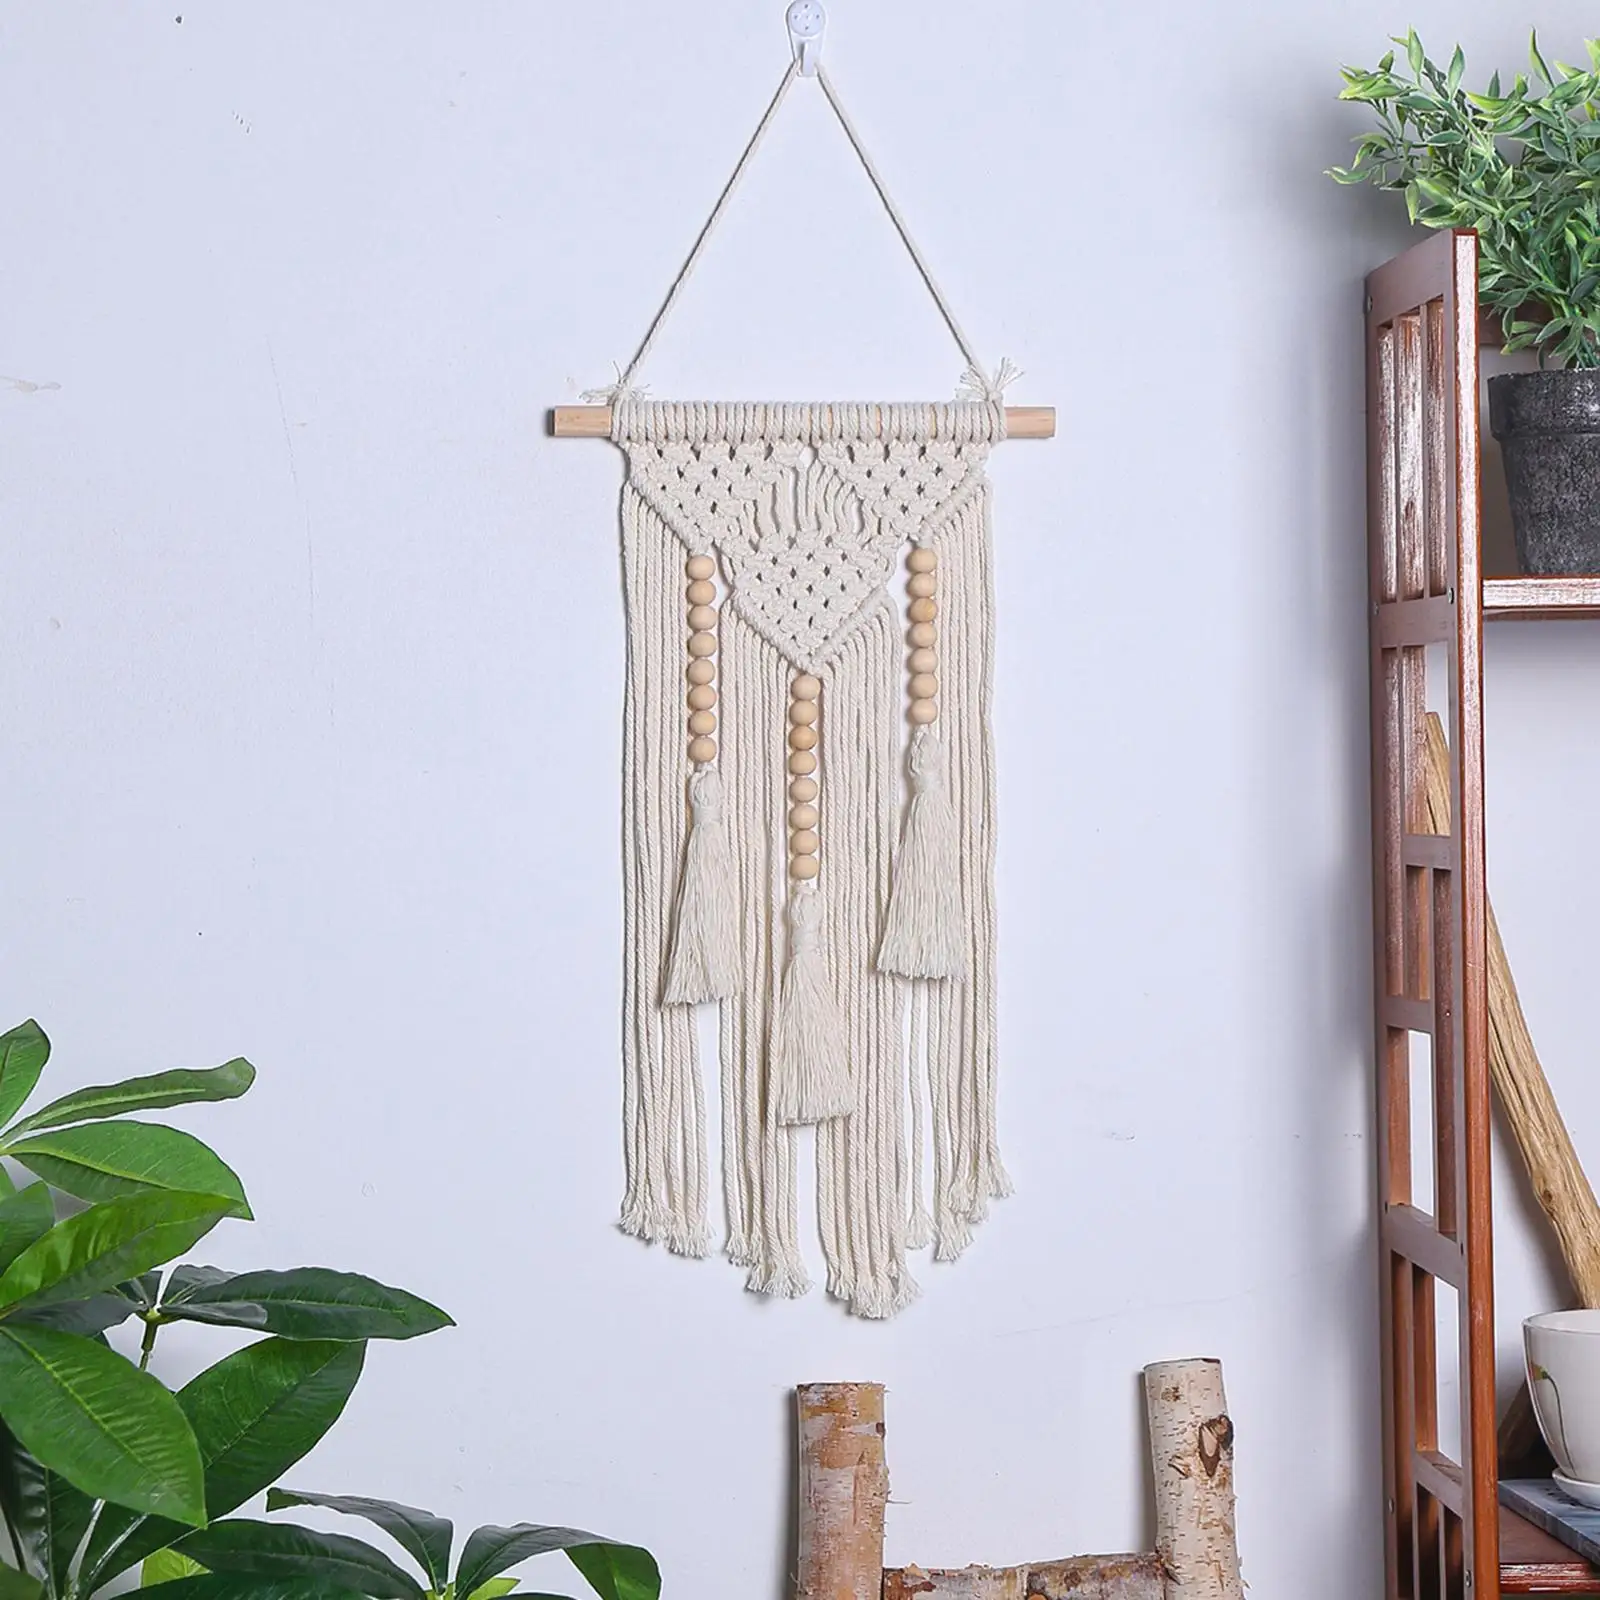 Macrame Wall Hanging Decor with Beads White Boho Wall Decor Woven Wall Art Decor for Wedding Bedroom Bed Dorm Decoration